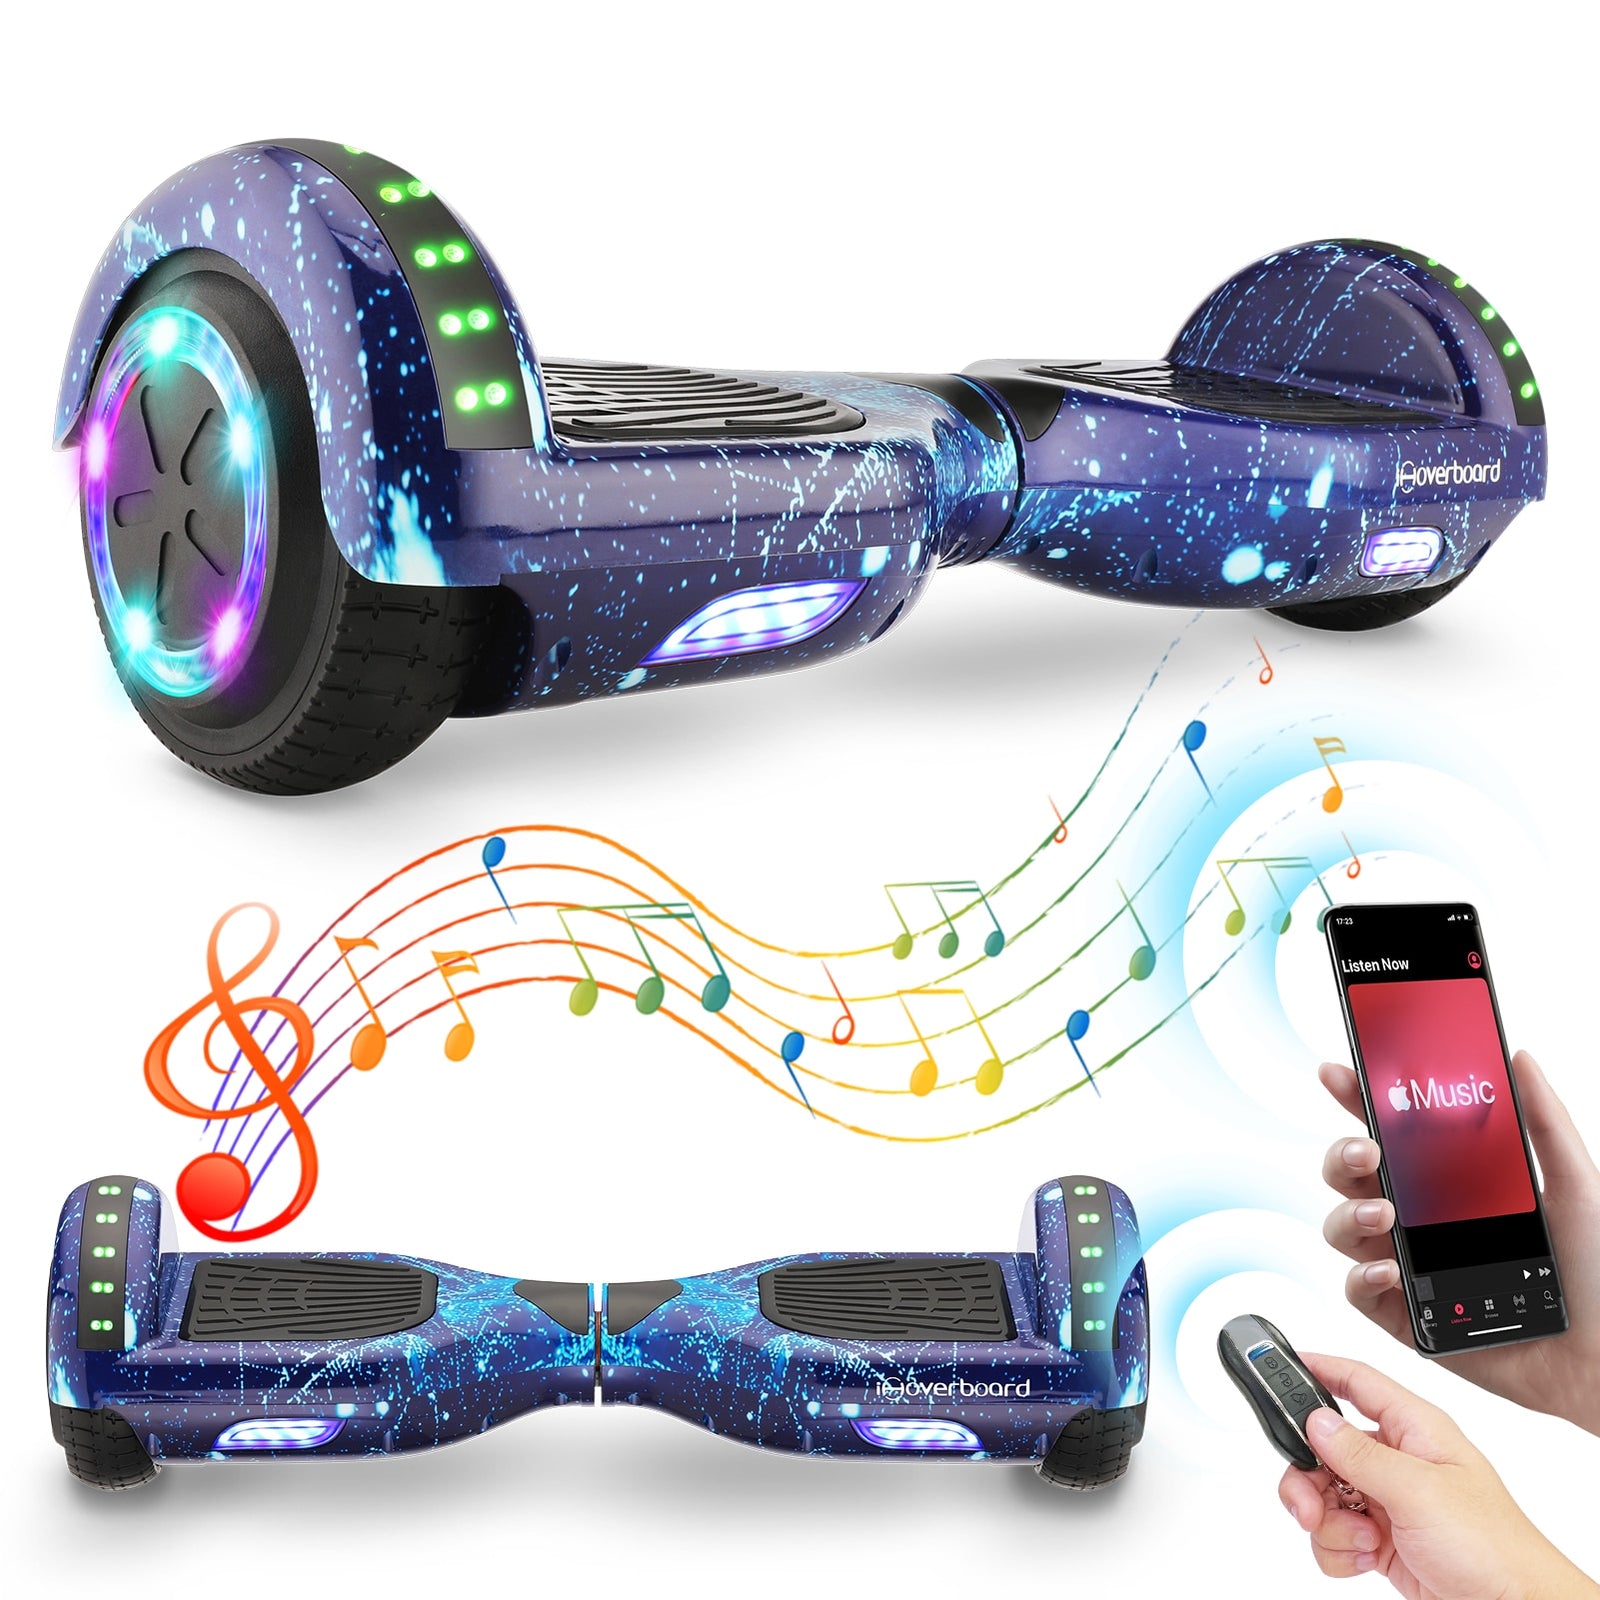 Electric iScooter Hoverboard Skateboard With LED Two Wheels